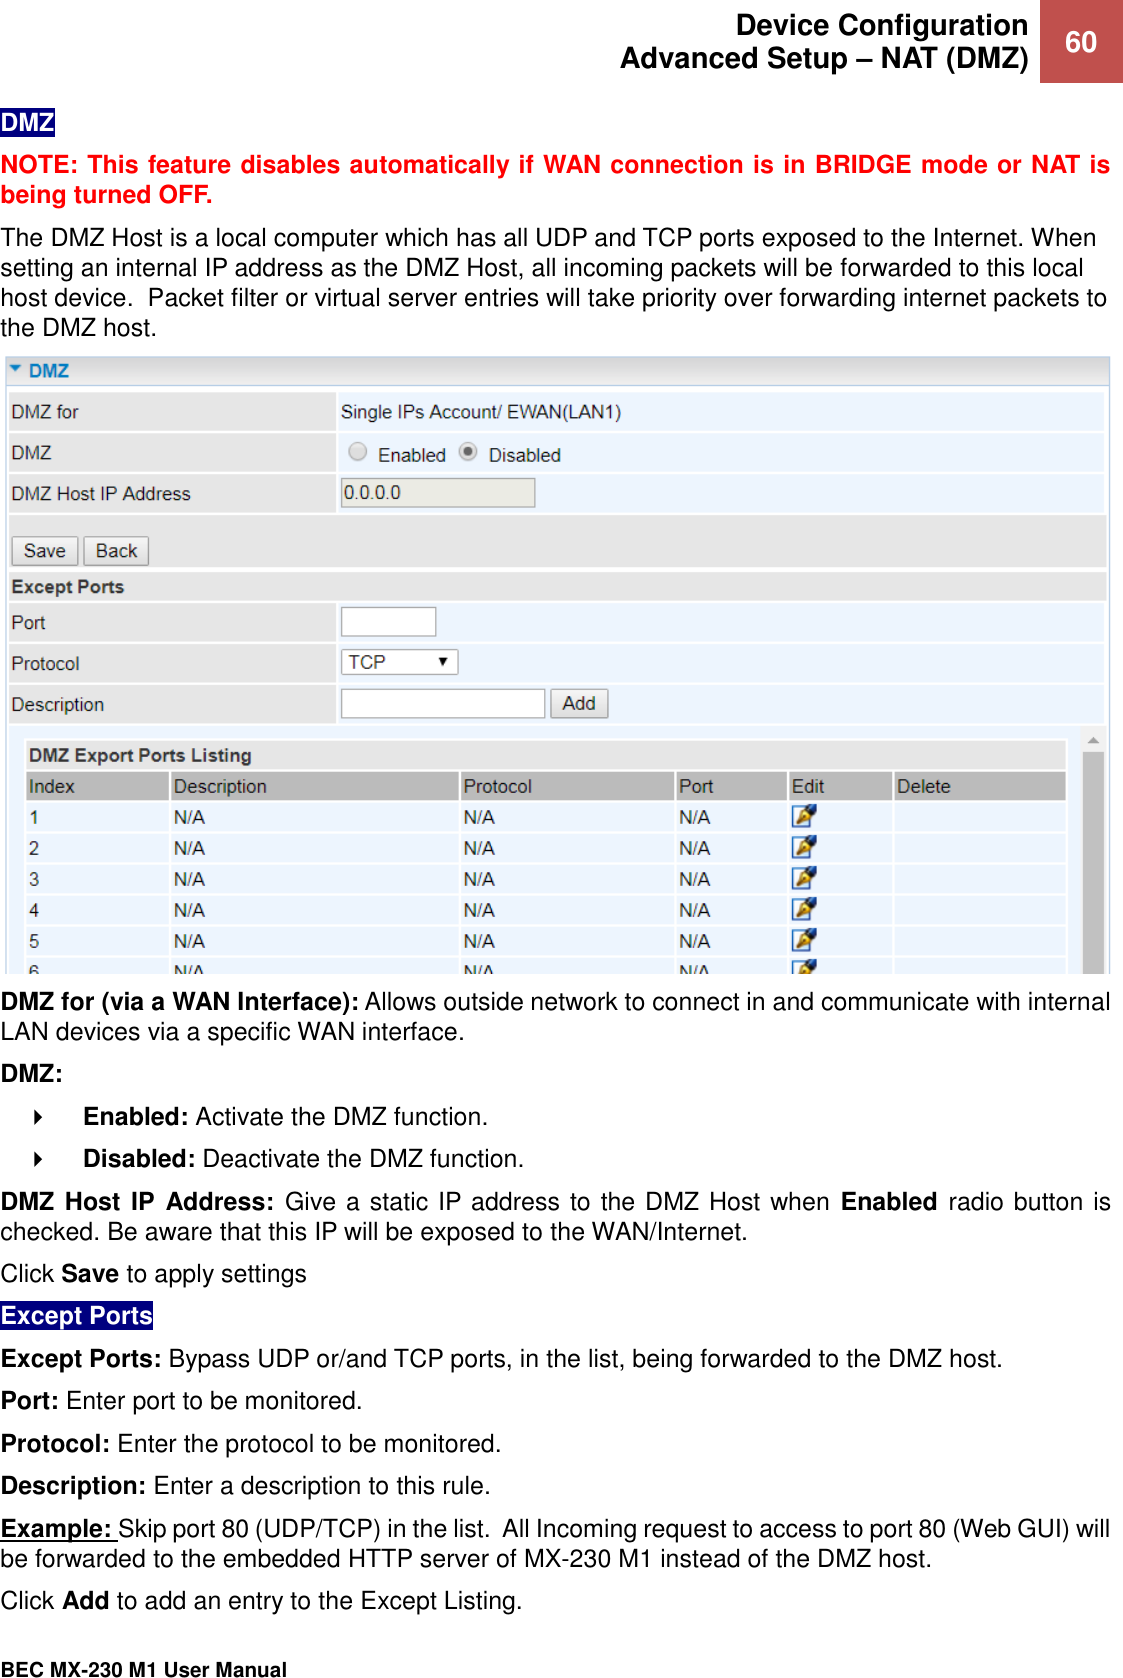  Device Configuration Advanced Setup – NAT (DMZ) 60   BEC MX-230 M1 User Manual  DMZ NOTE: This feature disables automatically if WAN connection is in BRIDGE mode or NAT is being turned OFF. The DMZ Host is a local computer which has all UDP and TCP ports exposed to the Internet. When setting an internal IP address as the DMZ Host, all incoming packets will be forwarded to this local host device.  Packet filter or virtual server entries will take priority over forwarding internet packets to the DMZ host.   DMZ for (via a WAN Interface): Allows outside network to connect in and communicate with internal LAN devices via a specific WAN interface. DMZ:     Enabled: Activate the DMZ function.      Disabled: Deactivate the DMZ function.   DMZ Host  IP  Address:  Give a static IP address to the DMZ Host when Enabled radio button is checked. Be aware that this IP will be exposed to the WAN/Internet. Click Save to apply settings Except Ports Except Ports: Bypass UDP or/and TCP ports, in the list, being forwarded to the DMZ host. Port: Enter port to be monitored. Protocol: Enter the protocol to be monitored. Description: Enter a description to this rule. Example: Skip port 80 (UDP/TCP) in the list.  All Incoming request to access to port 80 (Web GUI) will be forwarded to the embedded HTTP server of MX-230 M1 instead of the DMZ host.  Click Add to add an entry to the Except Listing. 